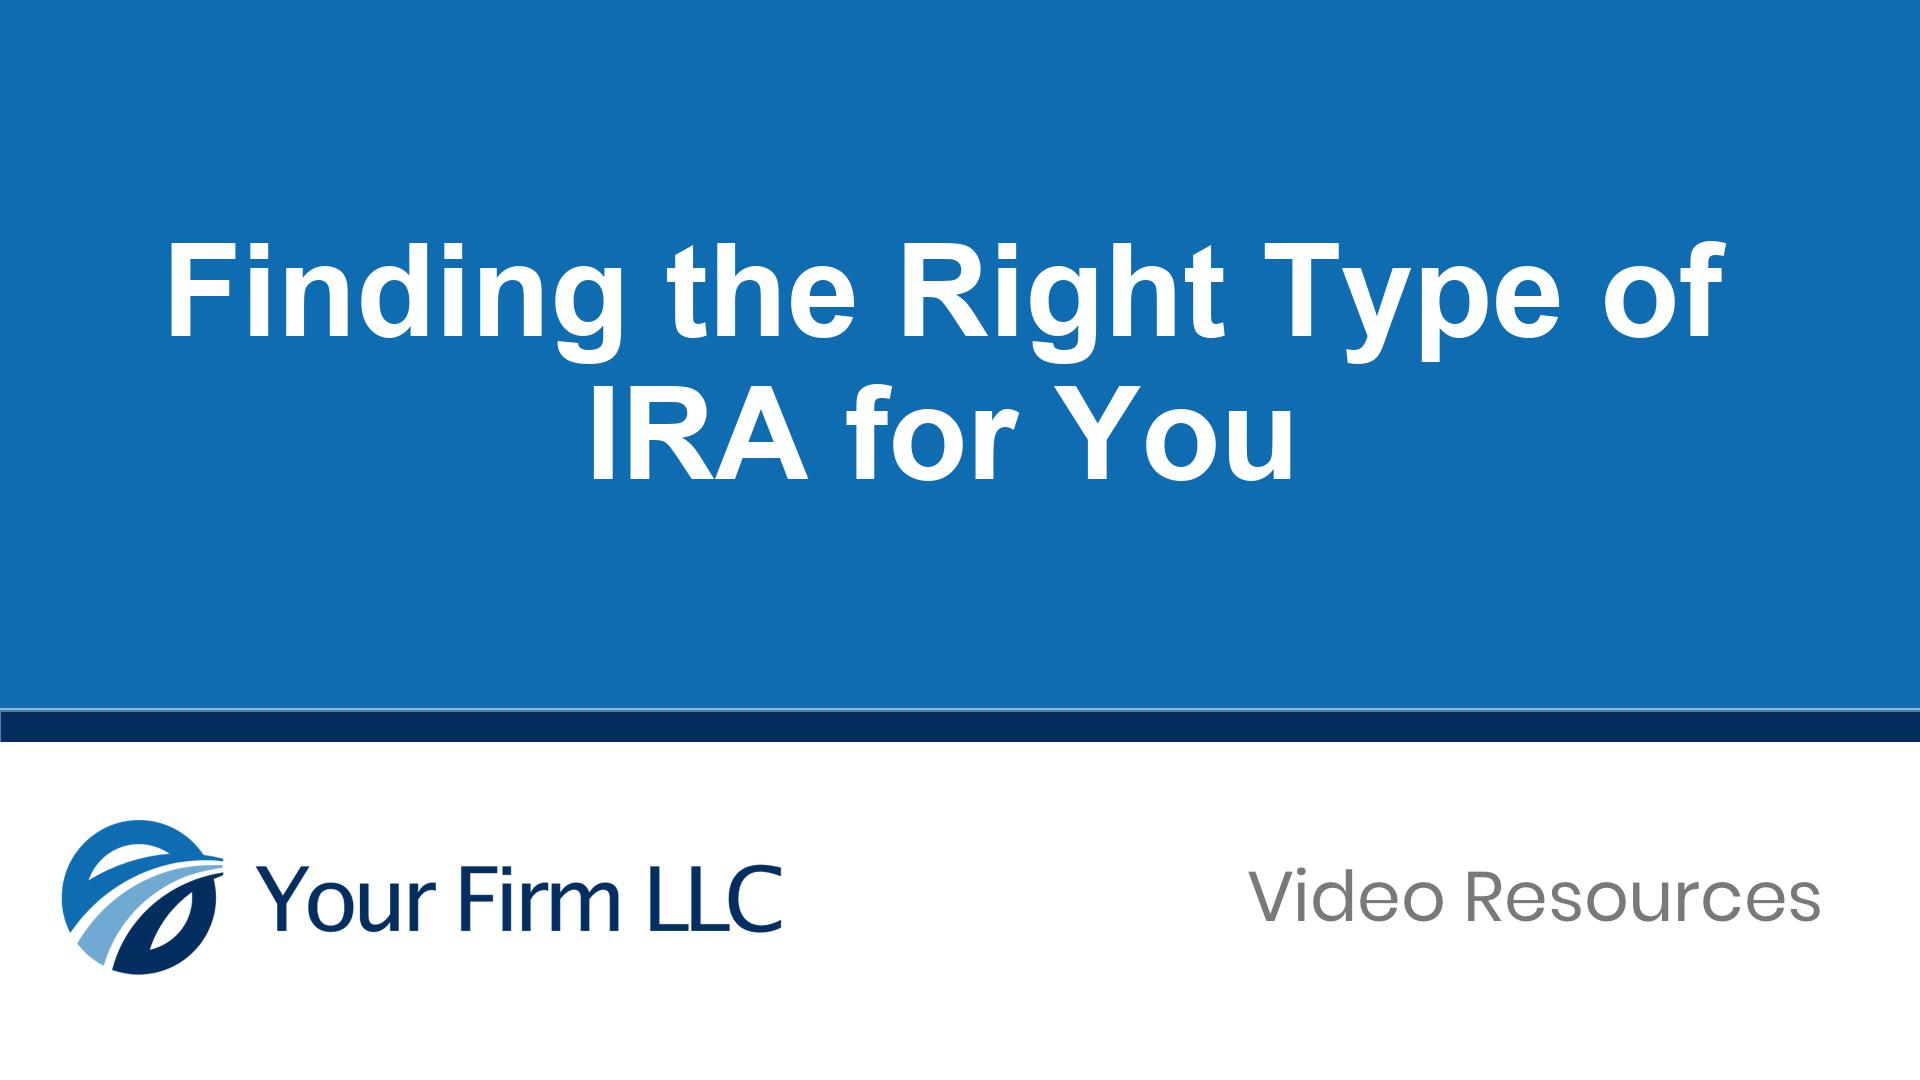 Finding the Right Type of IRA for You